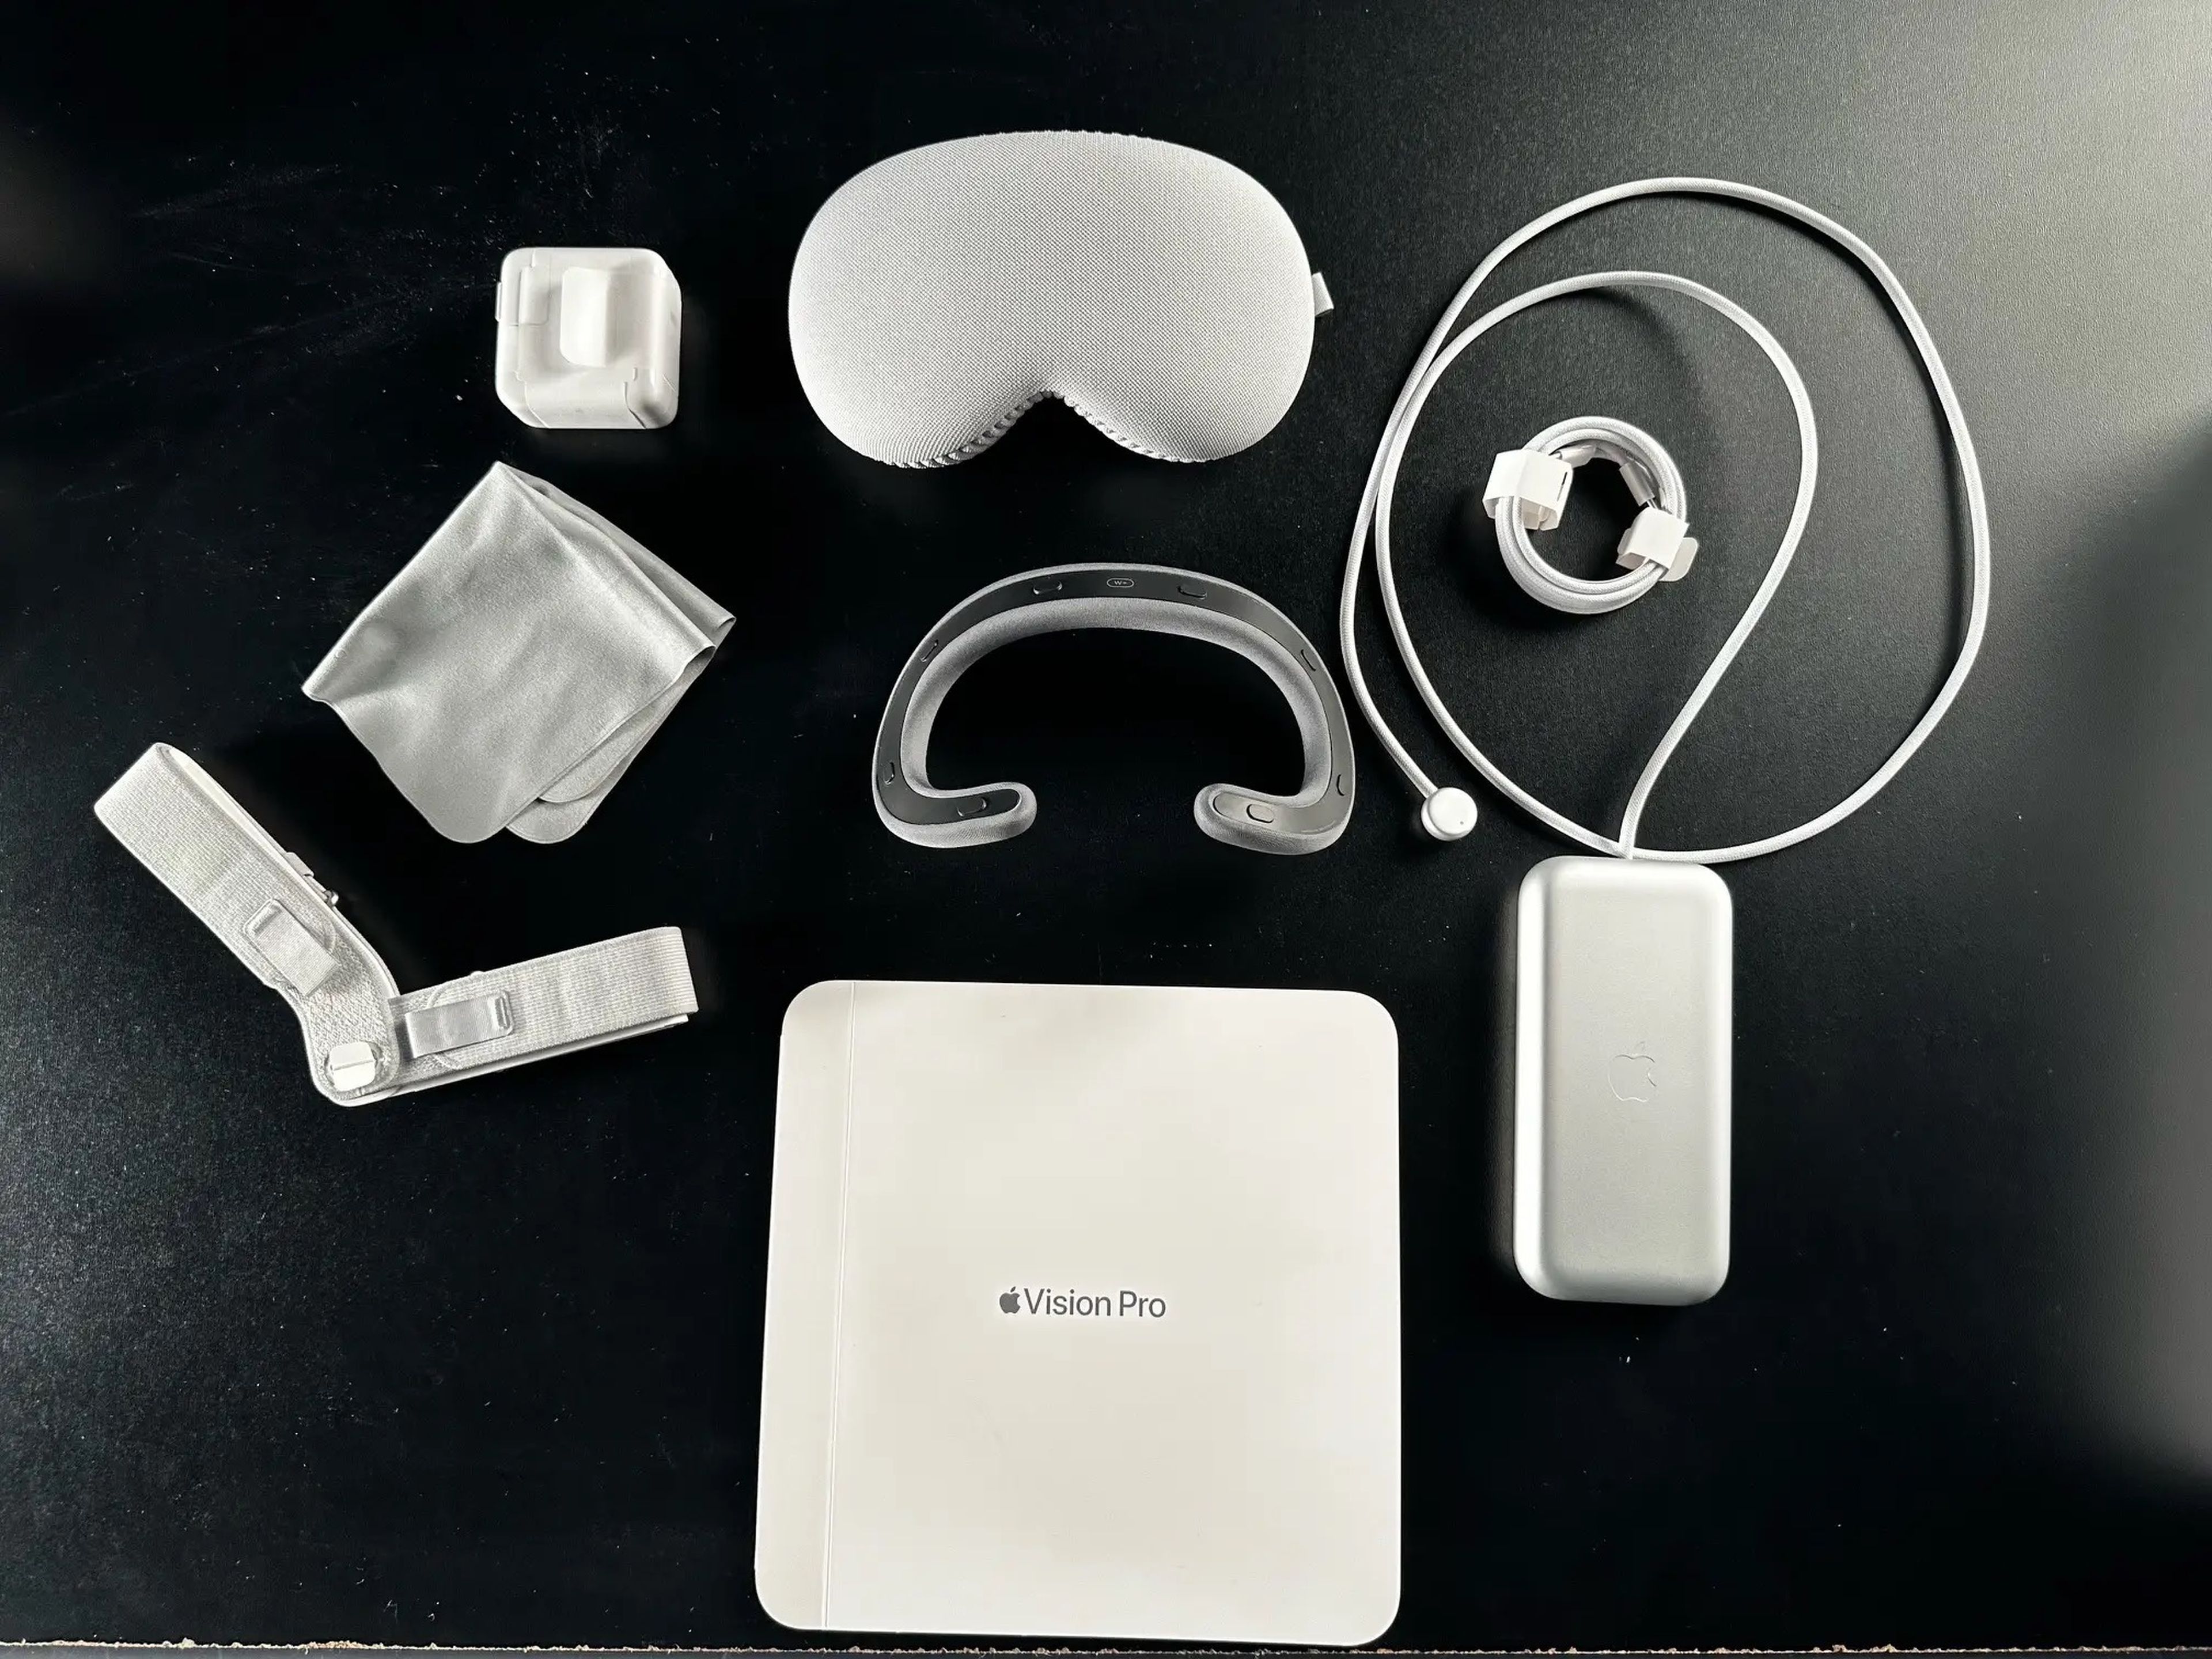 Accessories included with the Apple Vision Pro